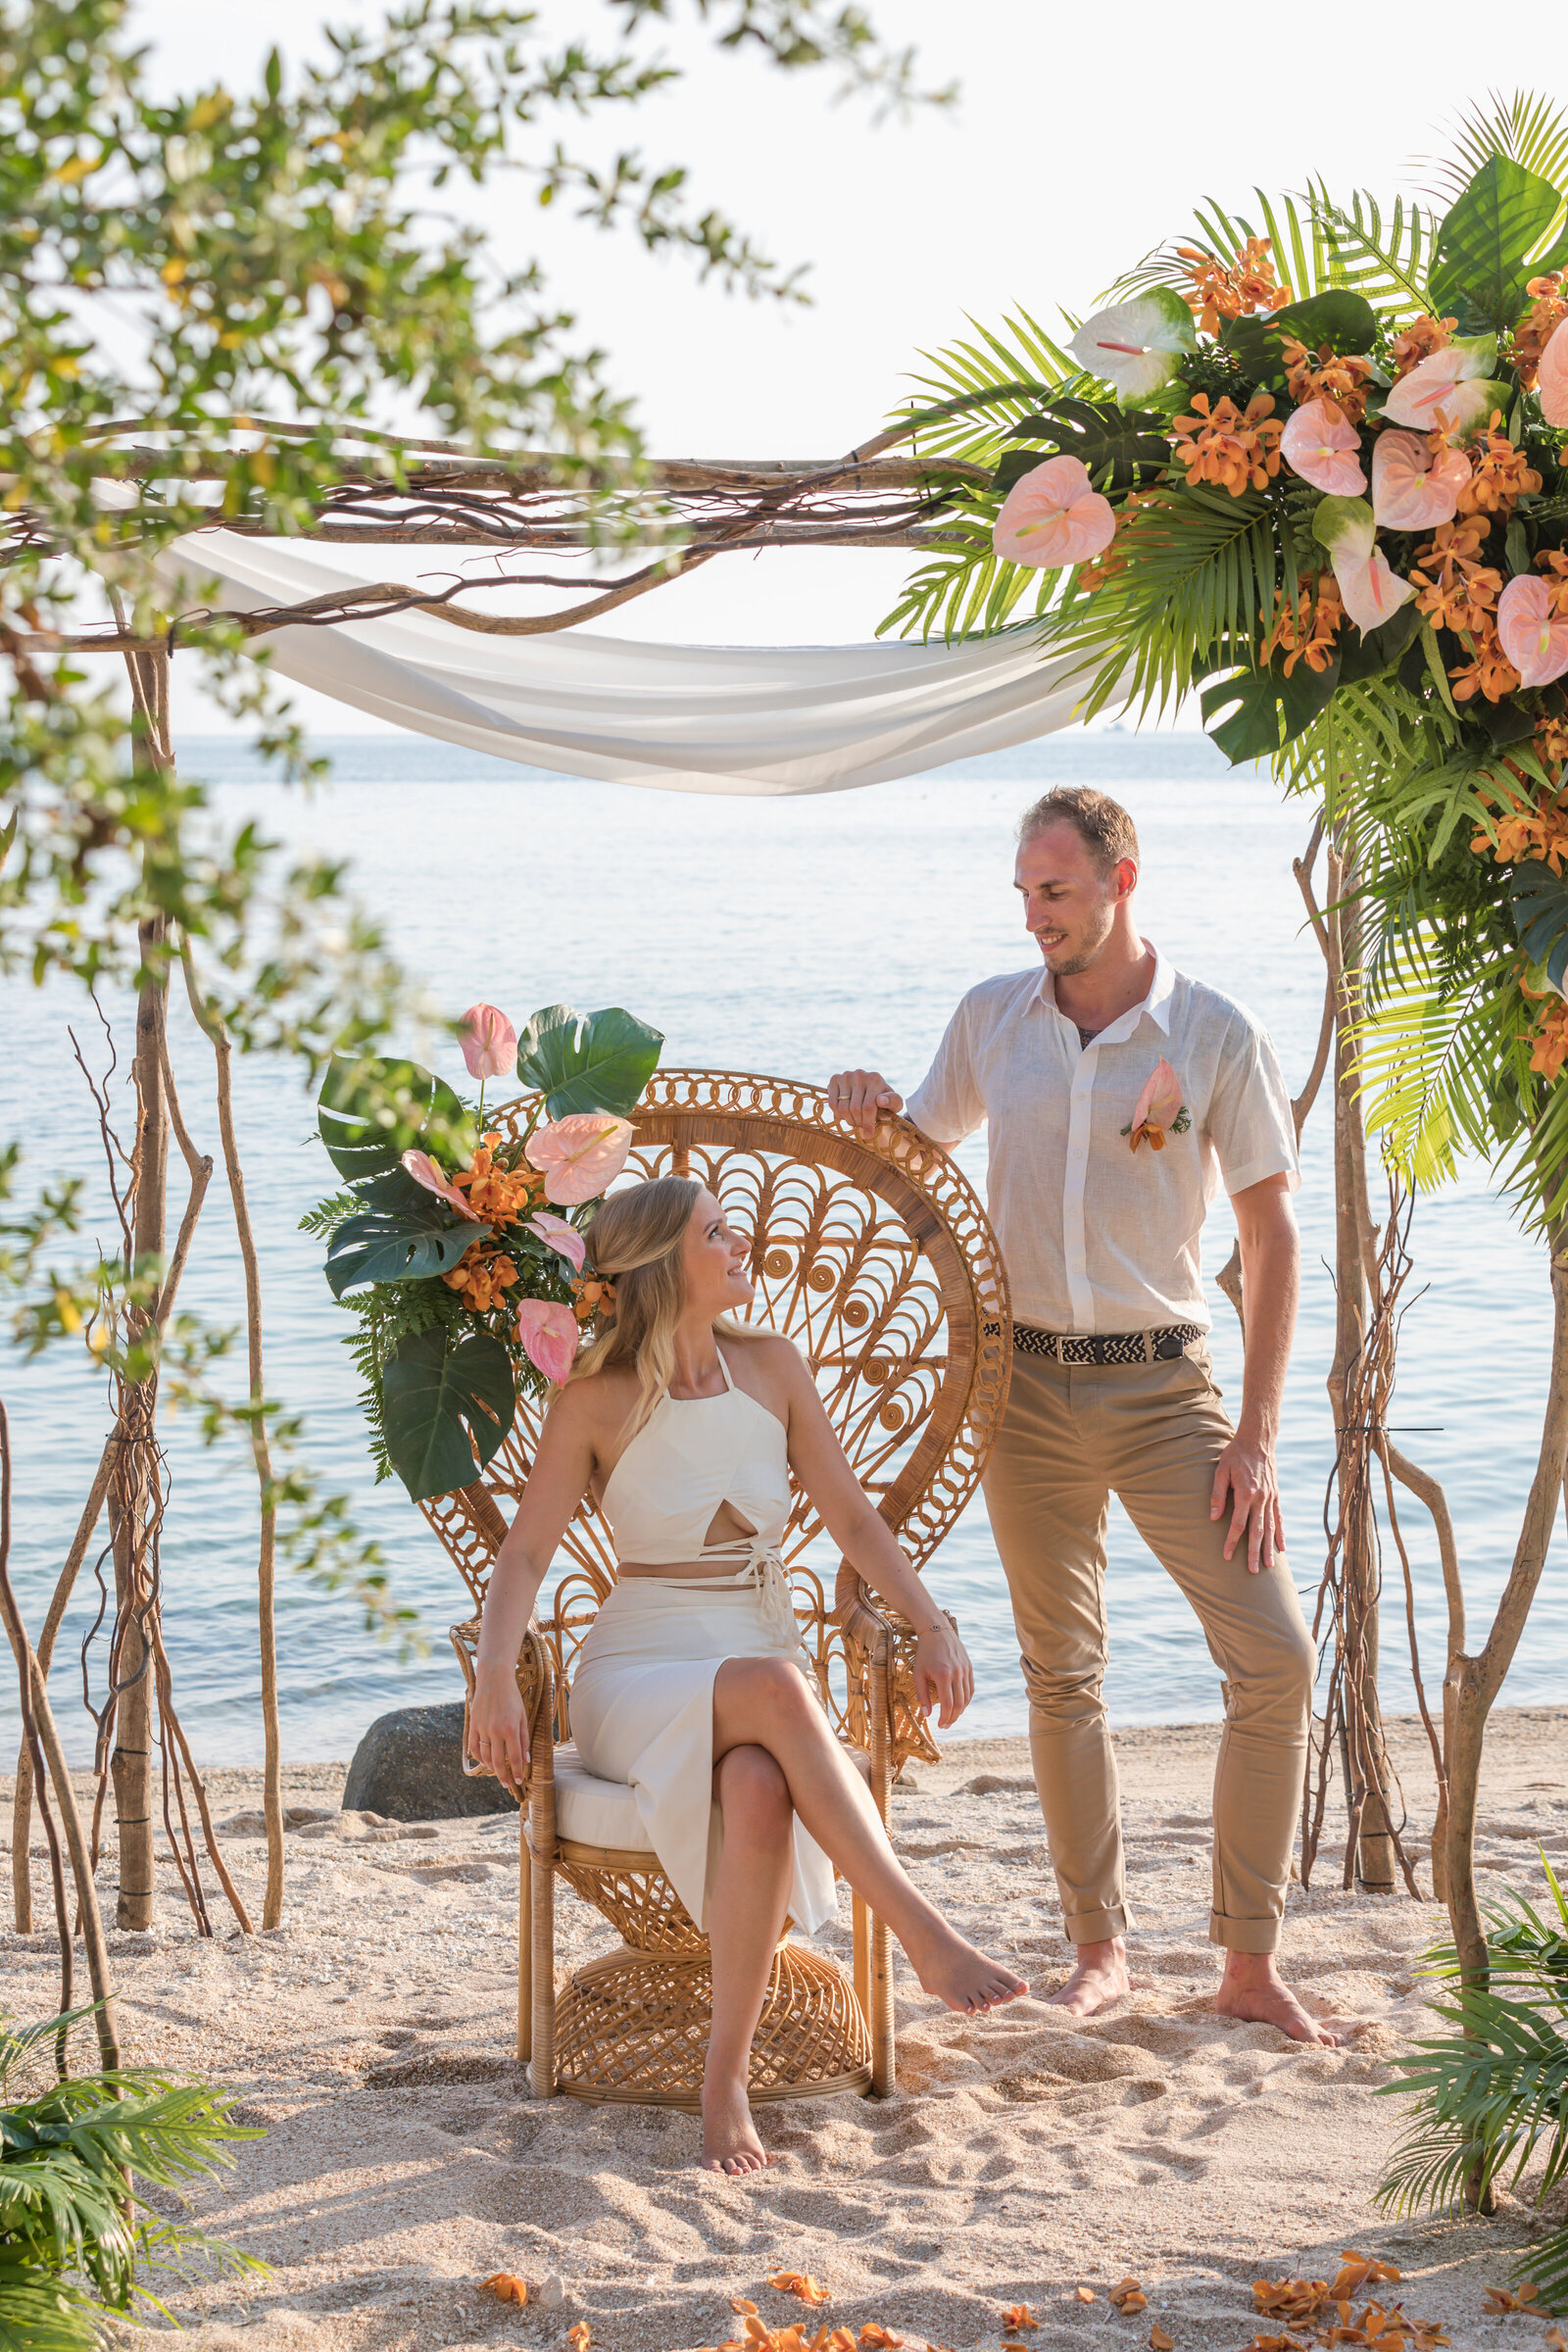 Tropical Wedding Arch and peacock chair